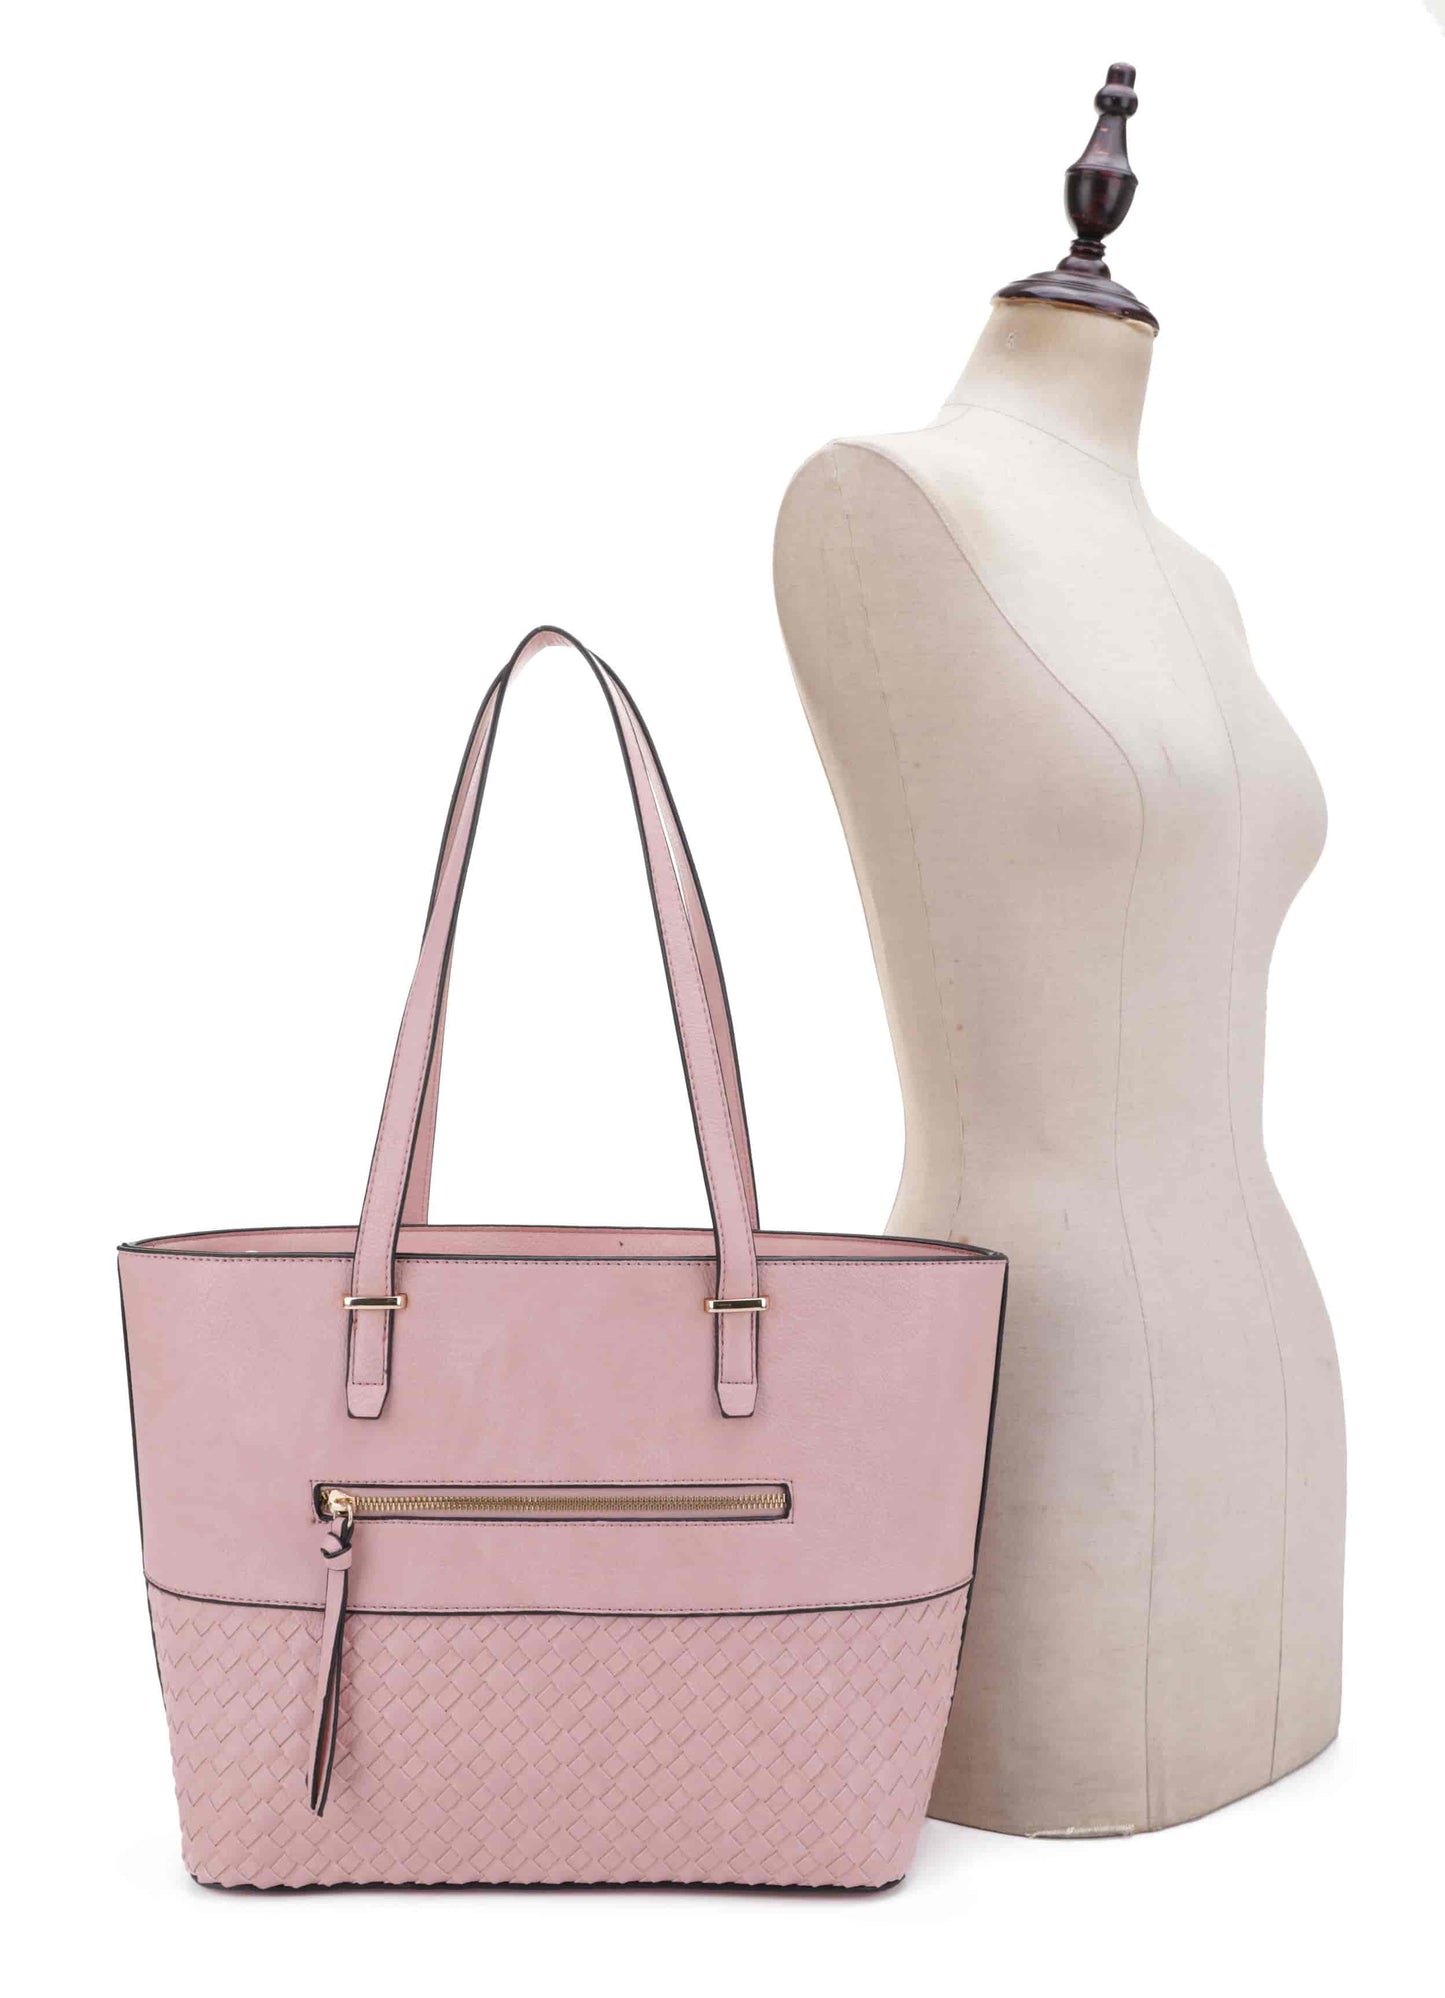 Woven Leather 3-in-1 Tote Bag Set